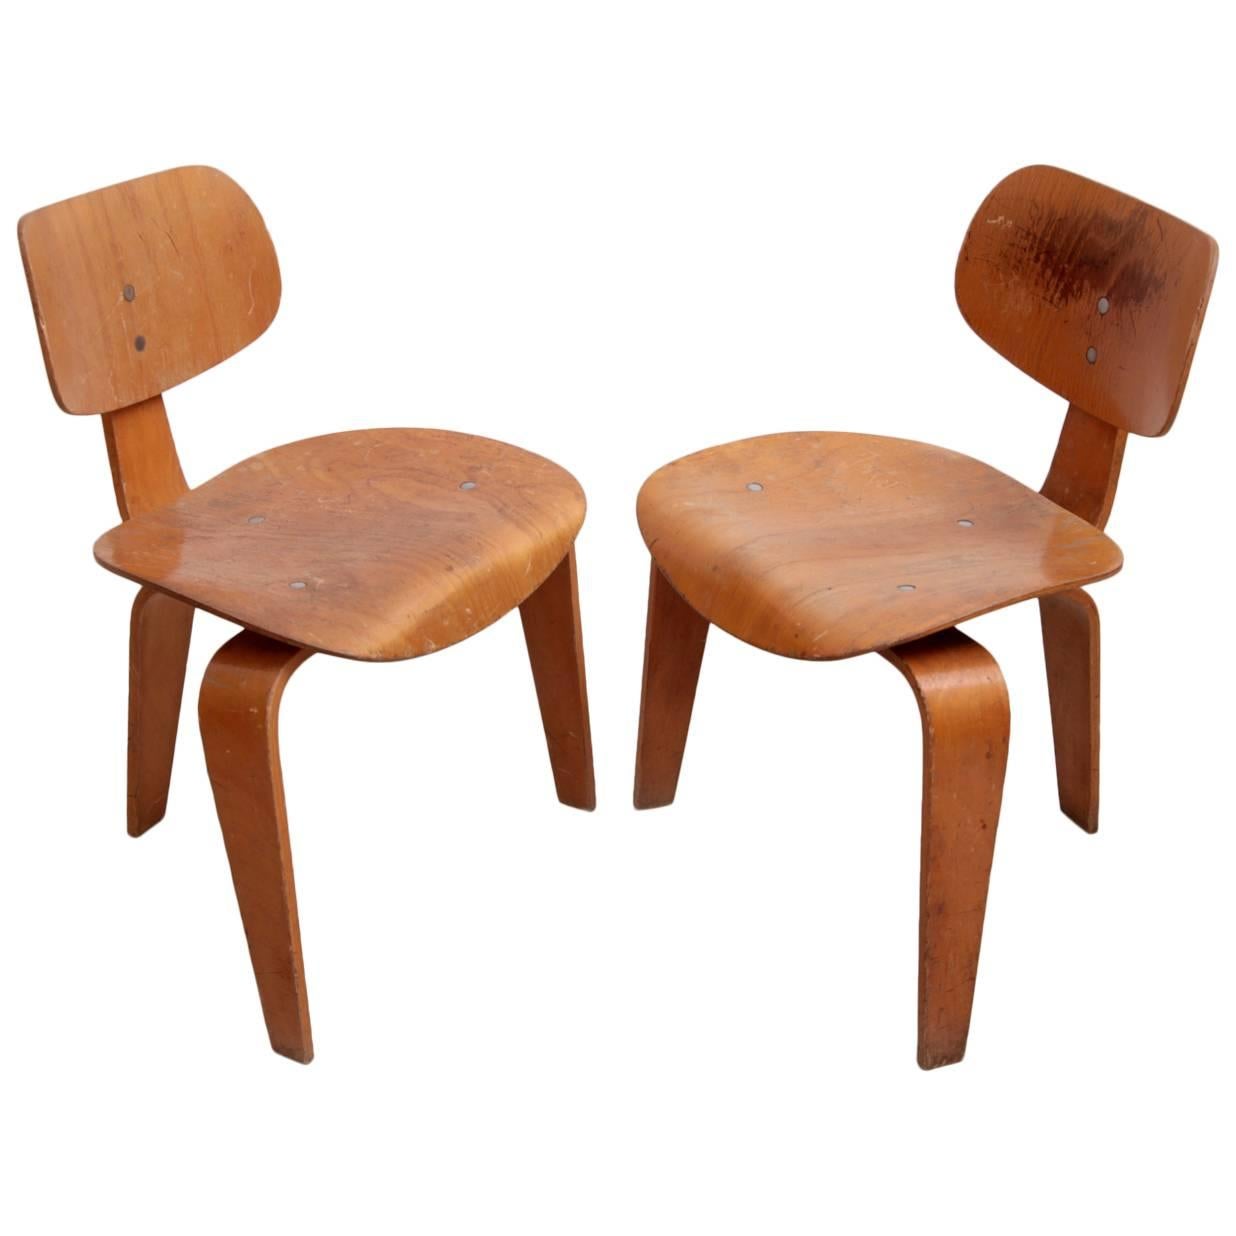 Rare Pair of Early SE42 Egon Eiermann Plywood Chairs, Germany, 1950s